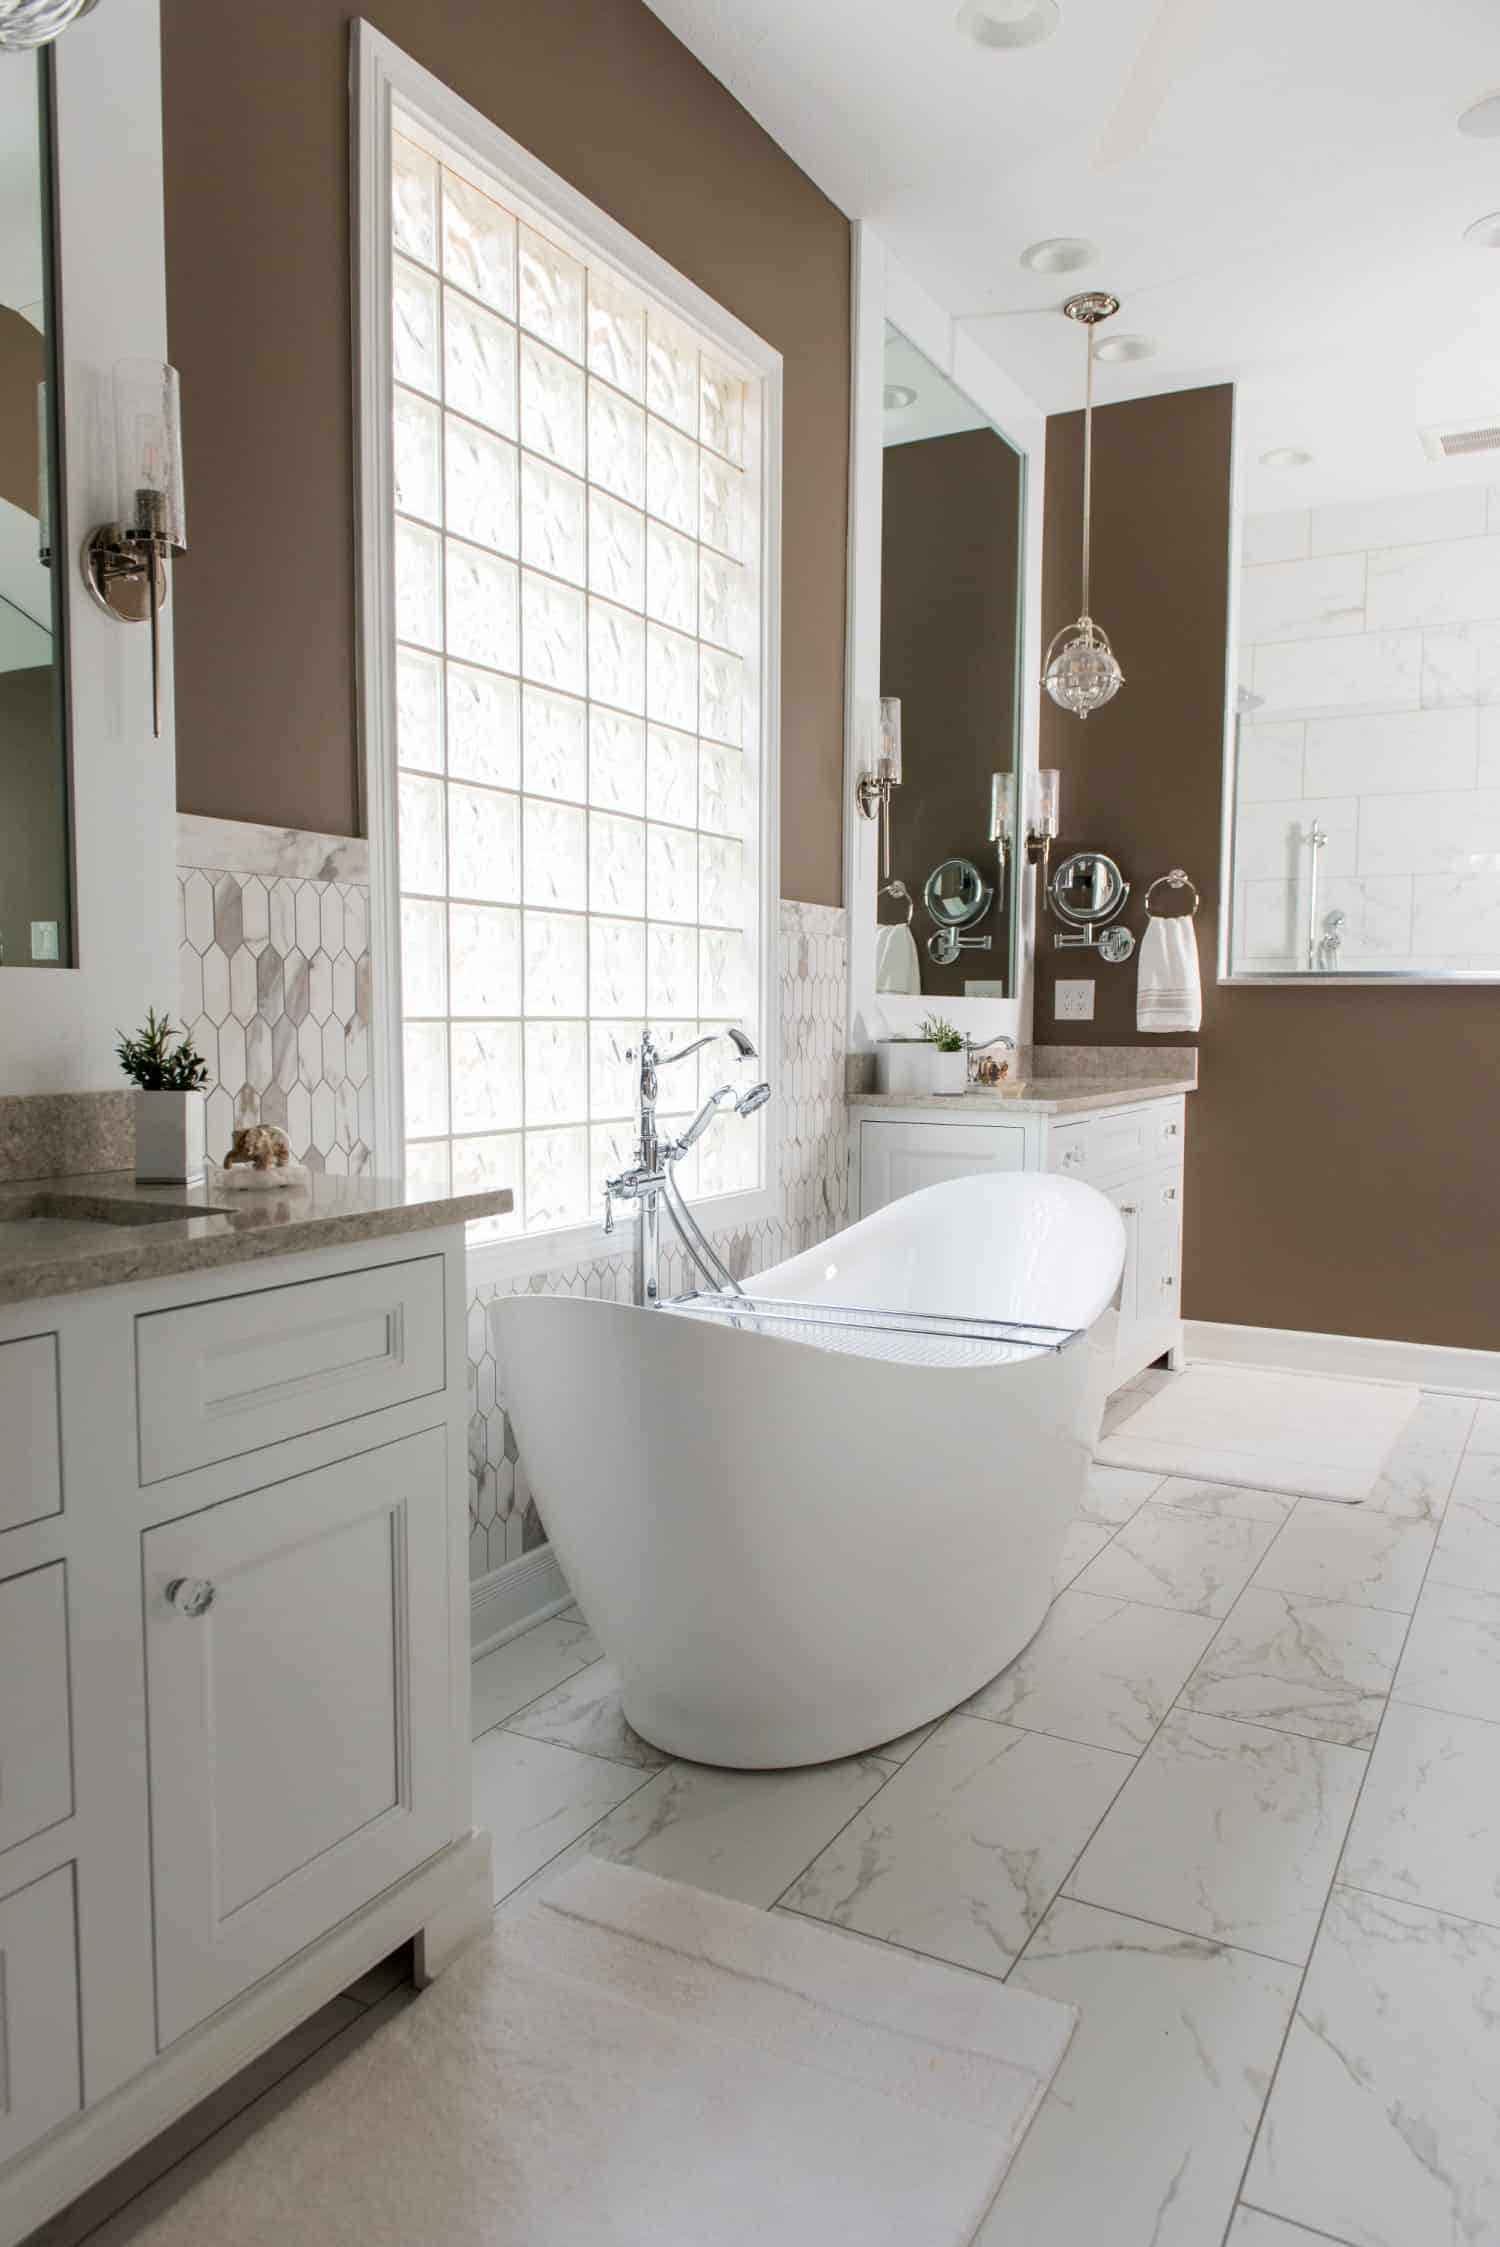 Nicholas Design Build | A white and brown bathroom with a large tub, creating a soothing oasis.